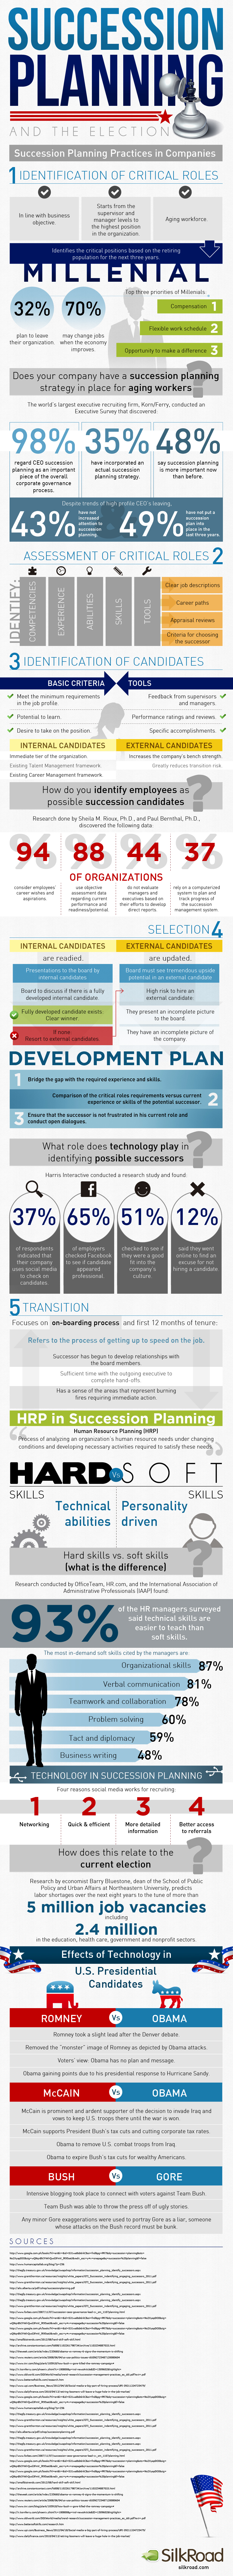 succession-planning-and-the-election-infographic_5099303f10add